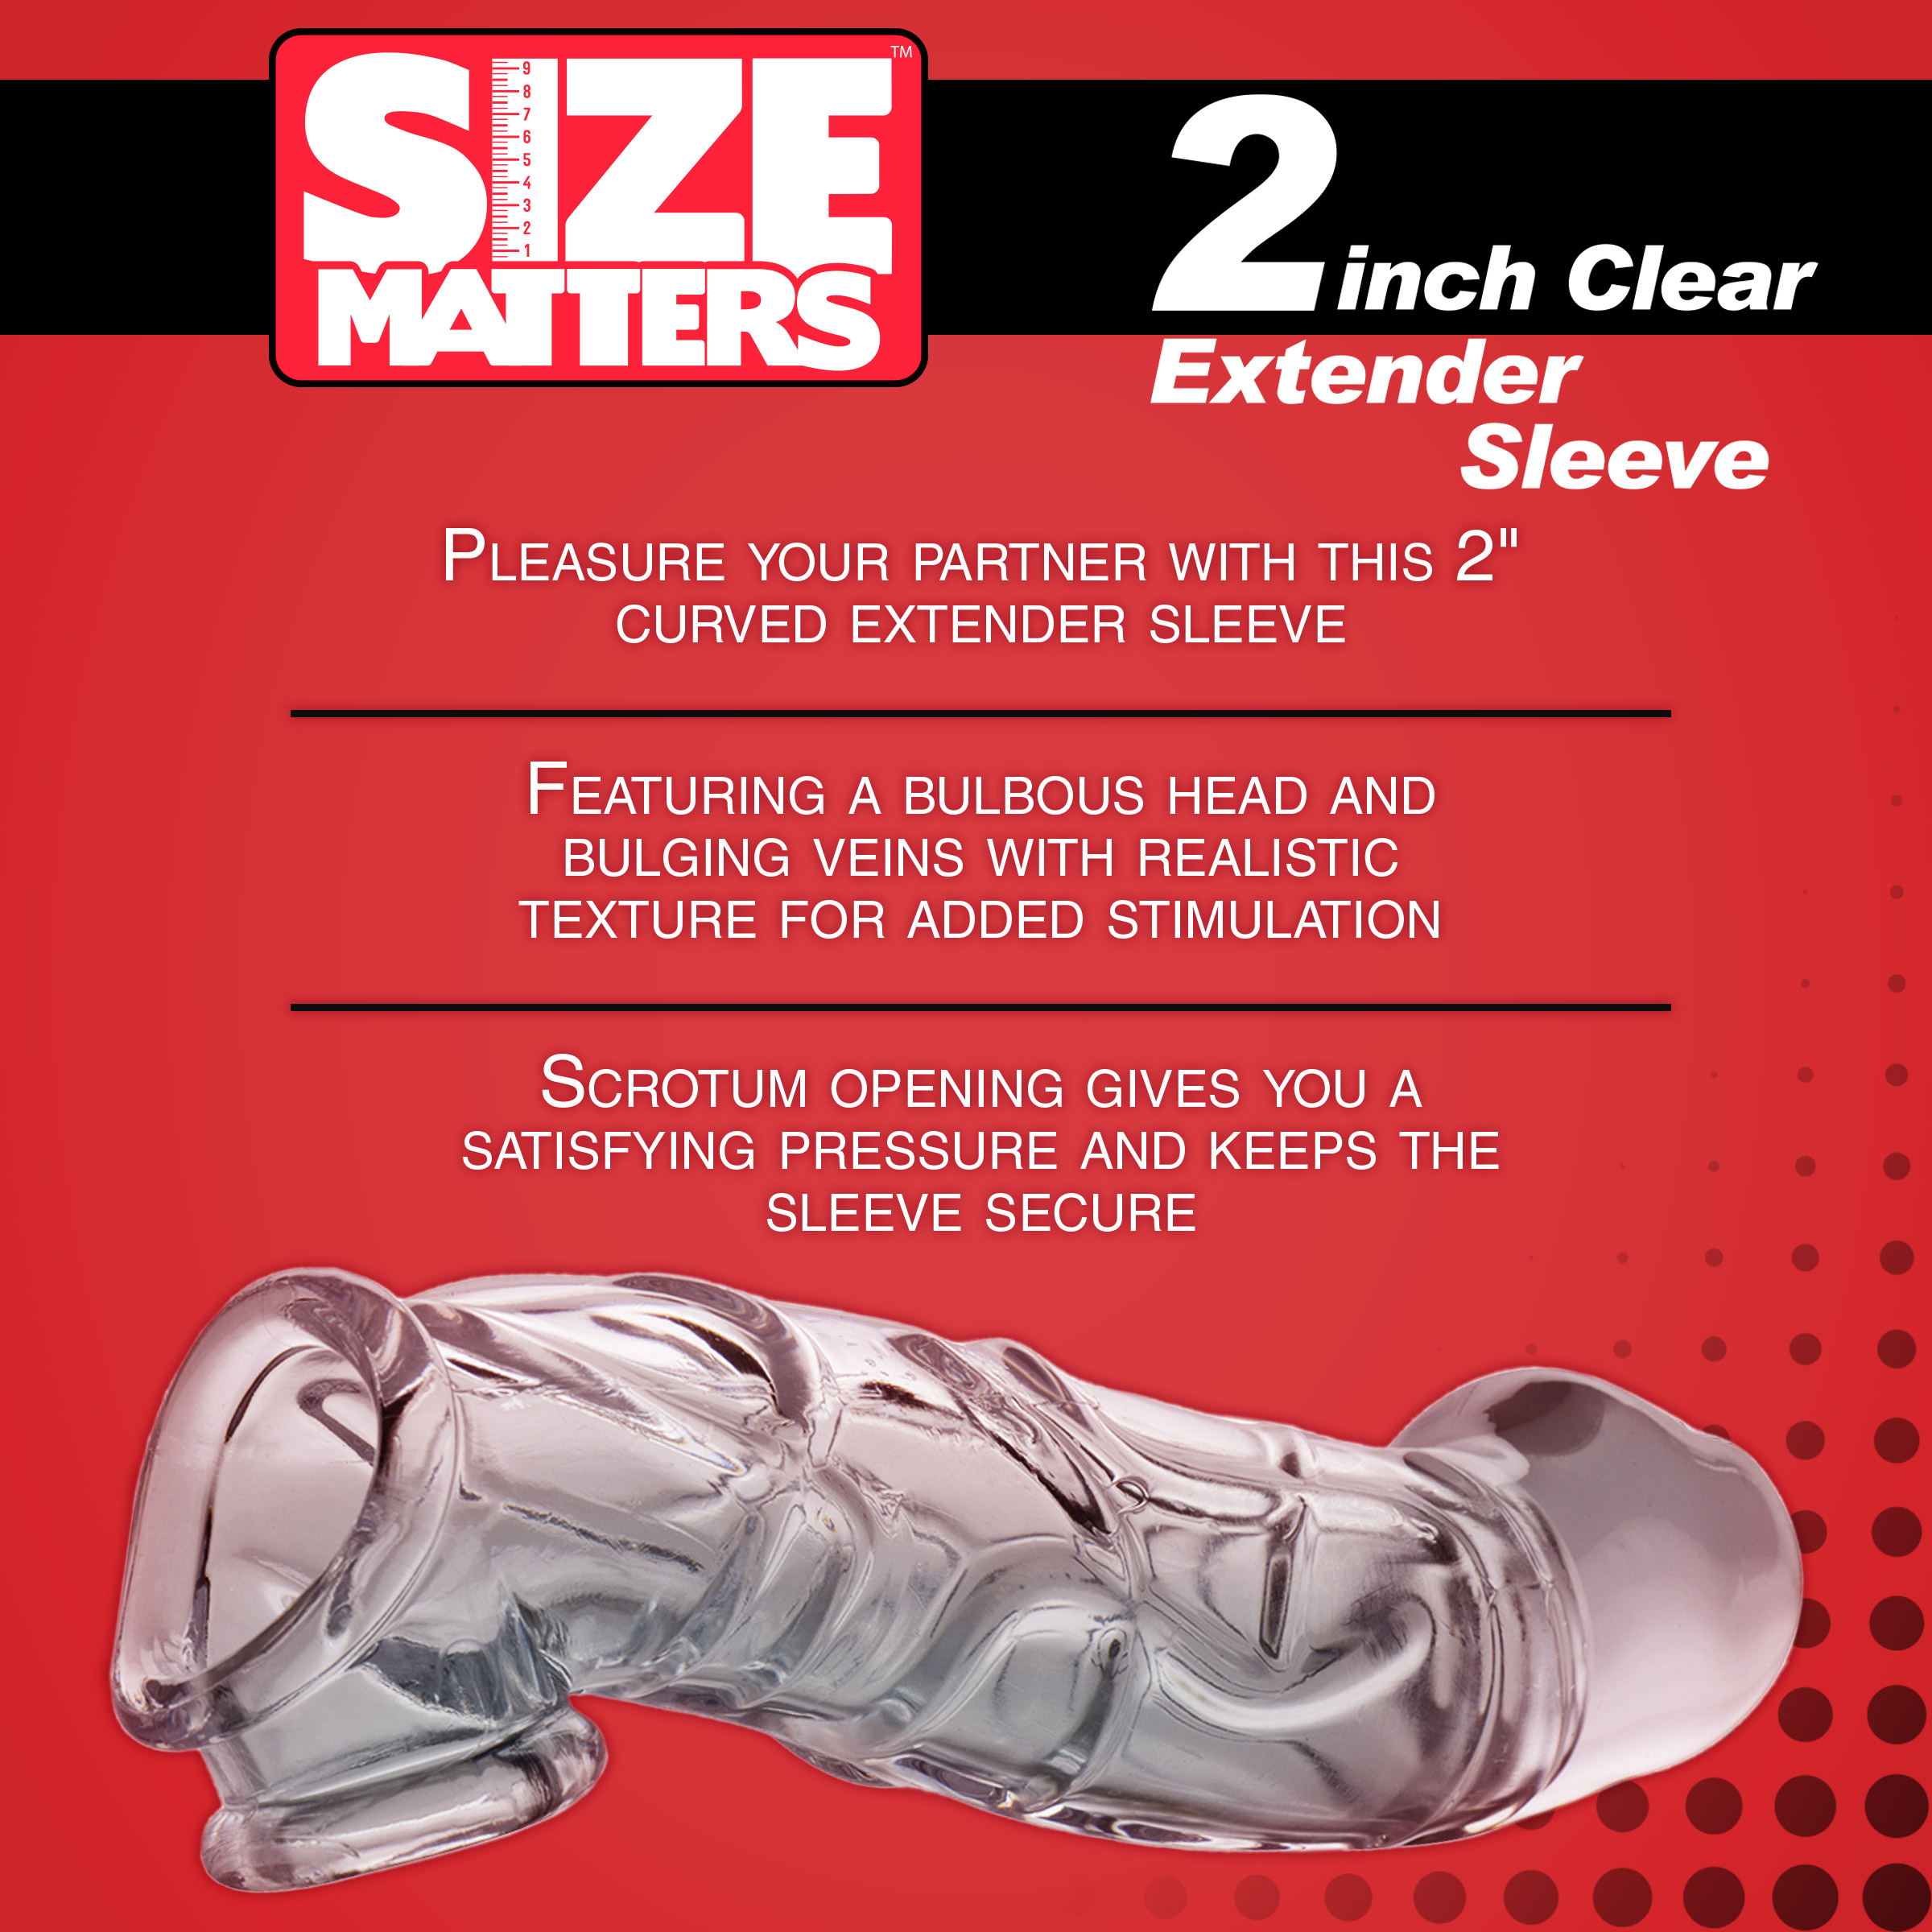 2 Inch Clear Extender Sleeve